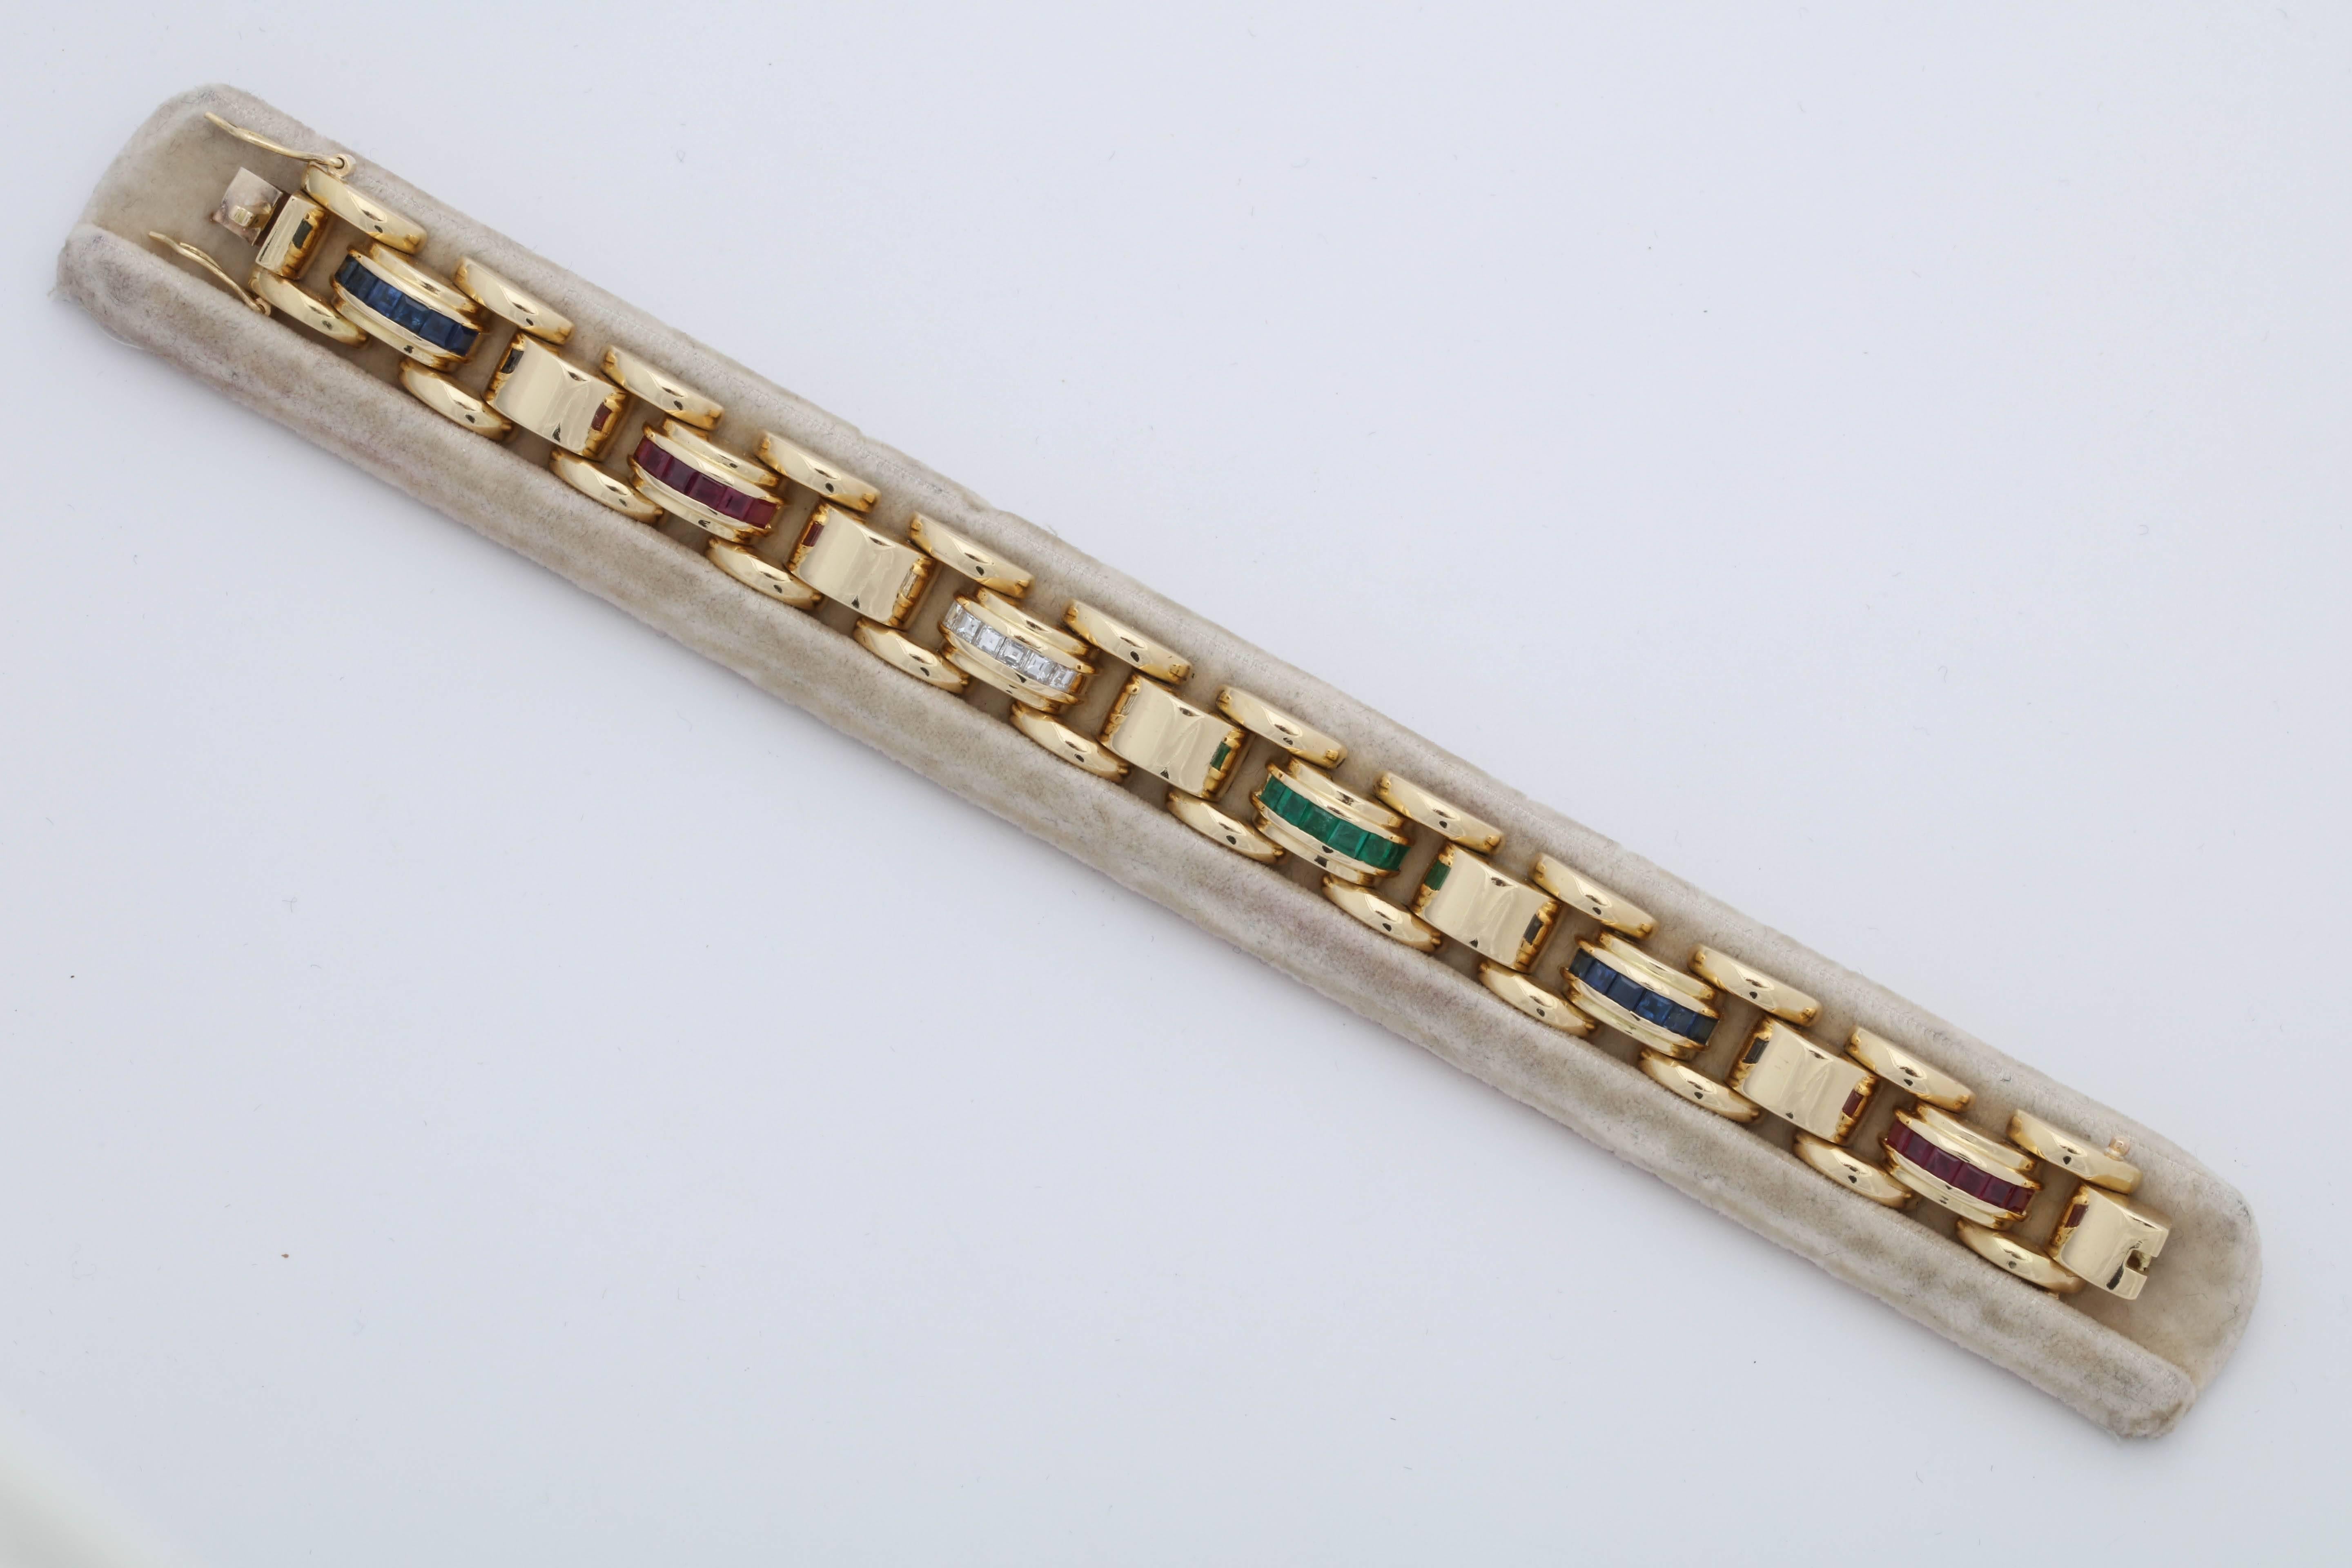 One Ladies 18kt Yellow Gold Heavy Link Bracelet Embellished With Eight Custom Cut Calibre Cut Emeralds Weighing Approx. 75 Carat Total weight And Further Designed with Eight Custom Cut Calibre Cut Sapphires Weighing approximately .75 Carat Total